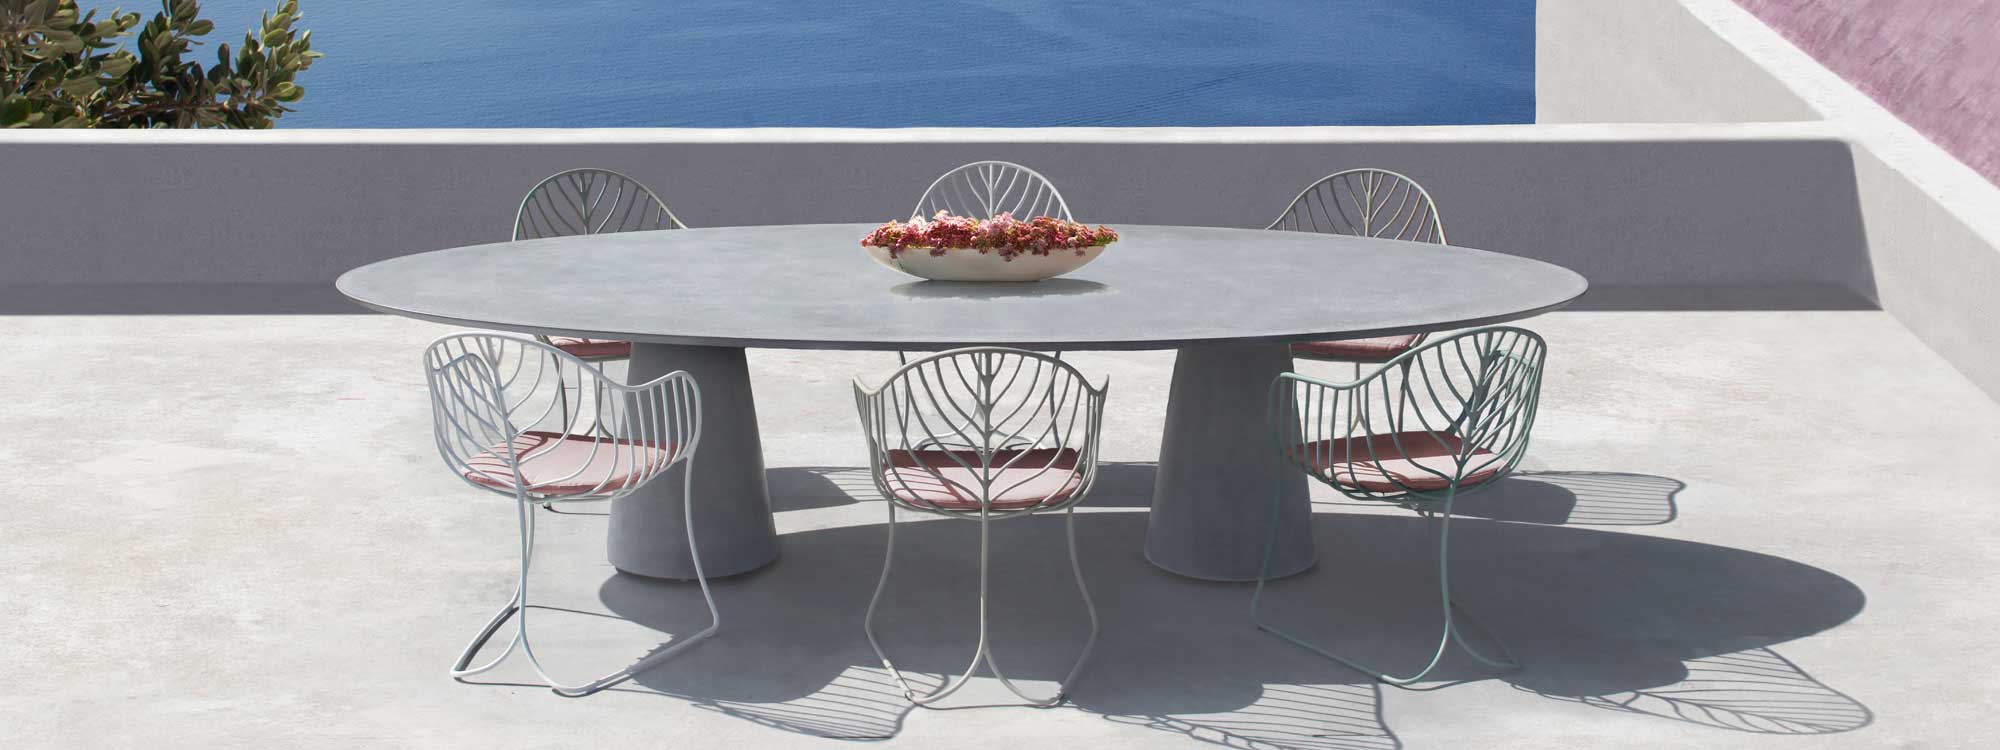 Image of Conix concrete garden table & white Folia chairs by Royal Botania on terrace overlooking azure sea.